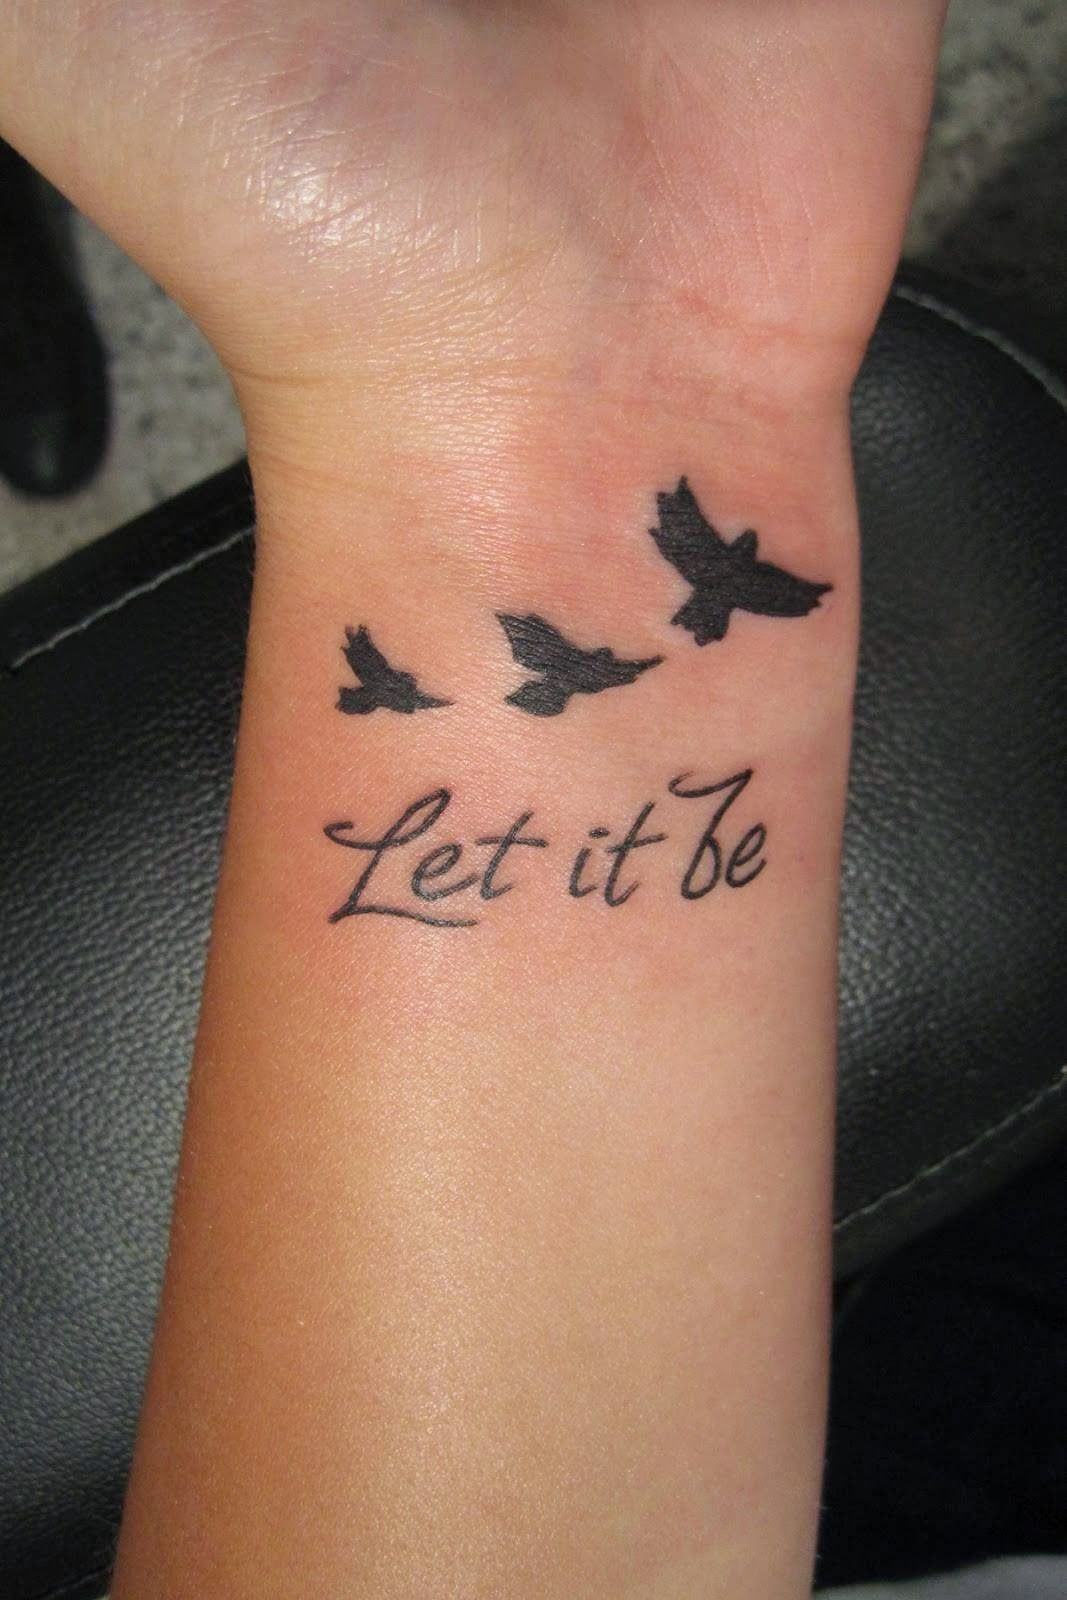 Let It Be Writing And Flying Birds Tattoo On Wrist Tattoo Mania within measurements 1067 X 1600